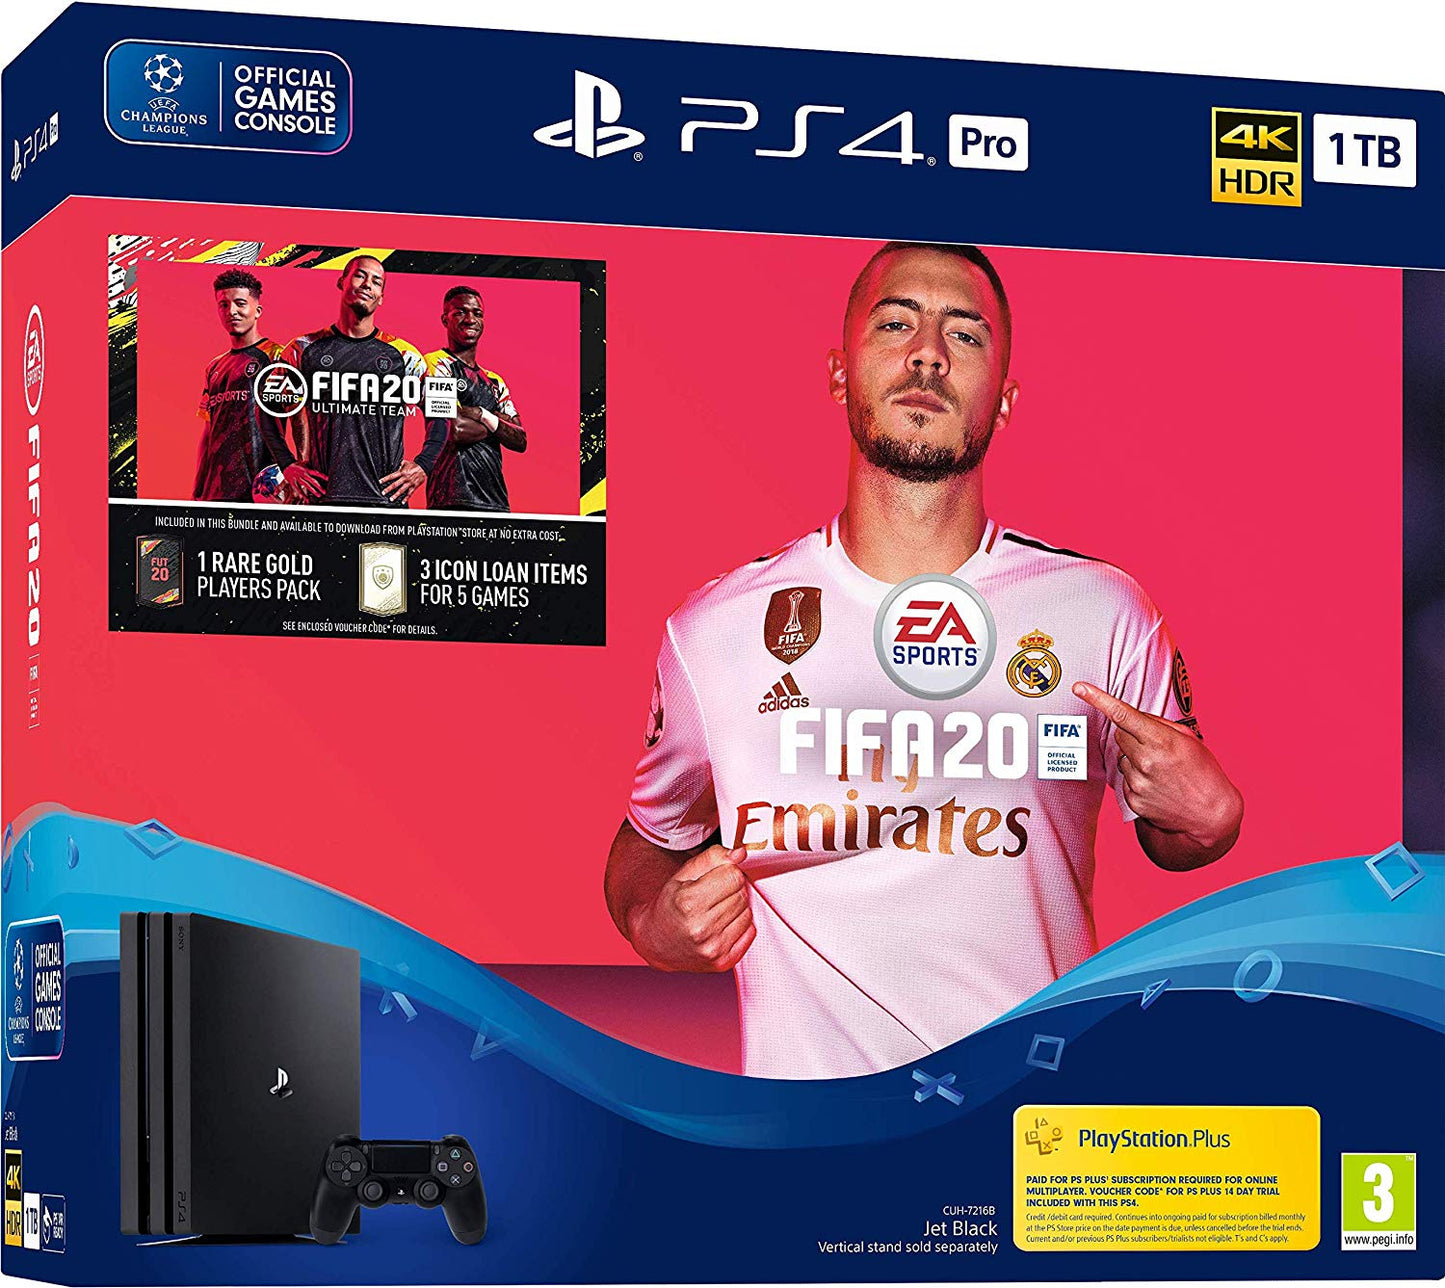 Fifa 20 PS4 Pro 1TB Bundle (PS4) - Offer Games